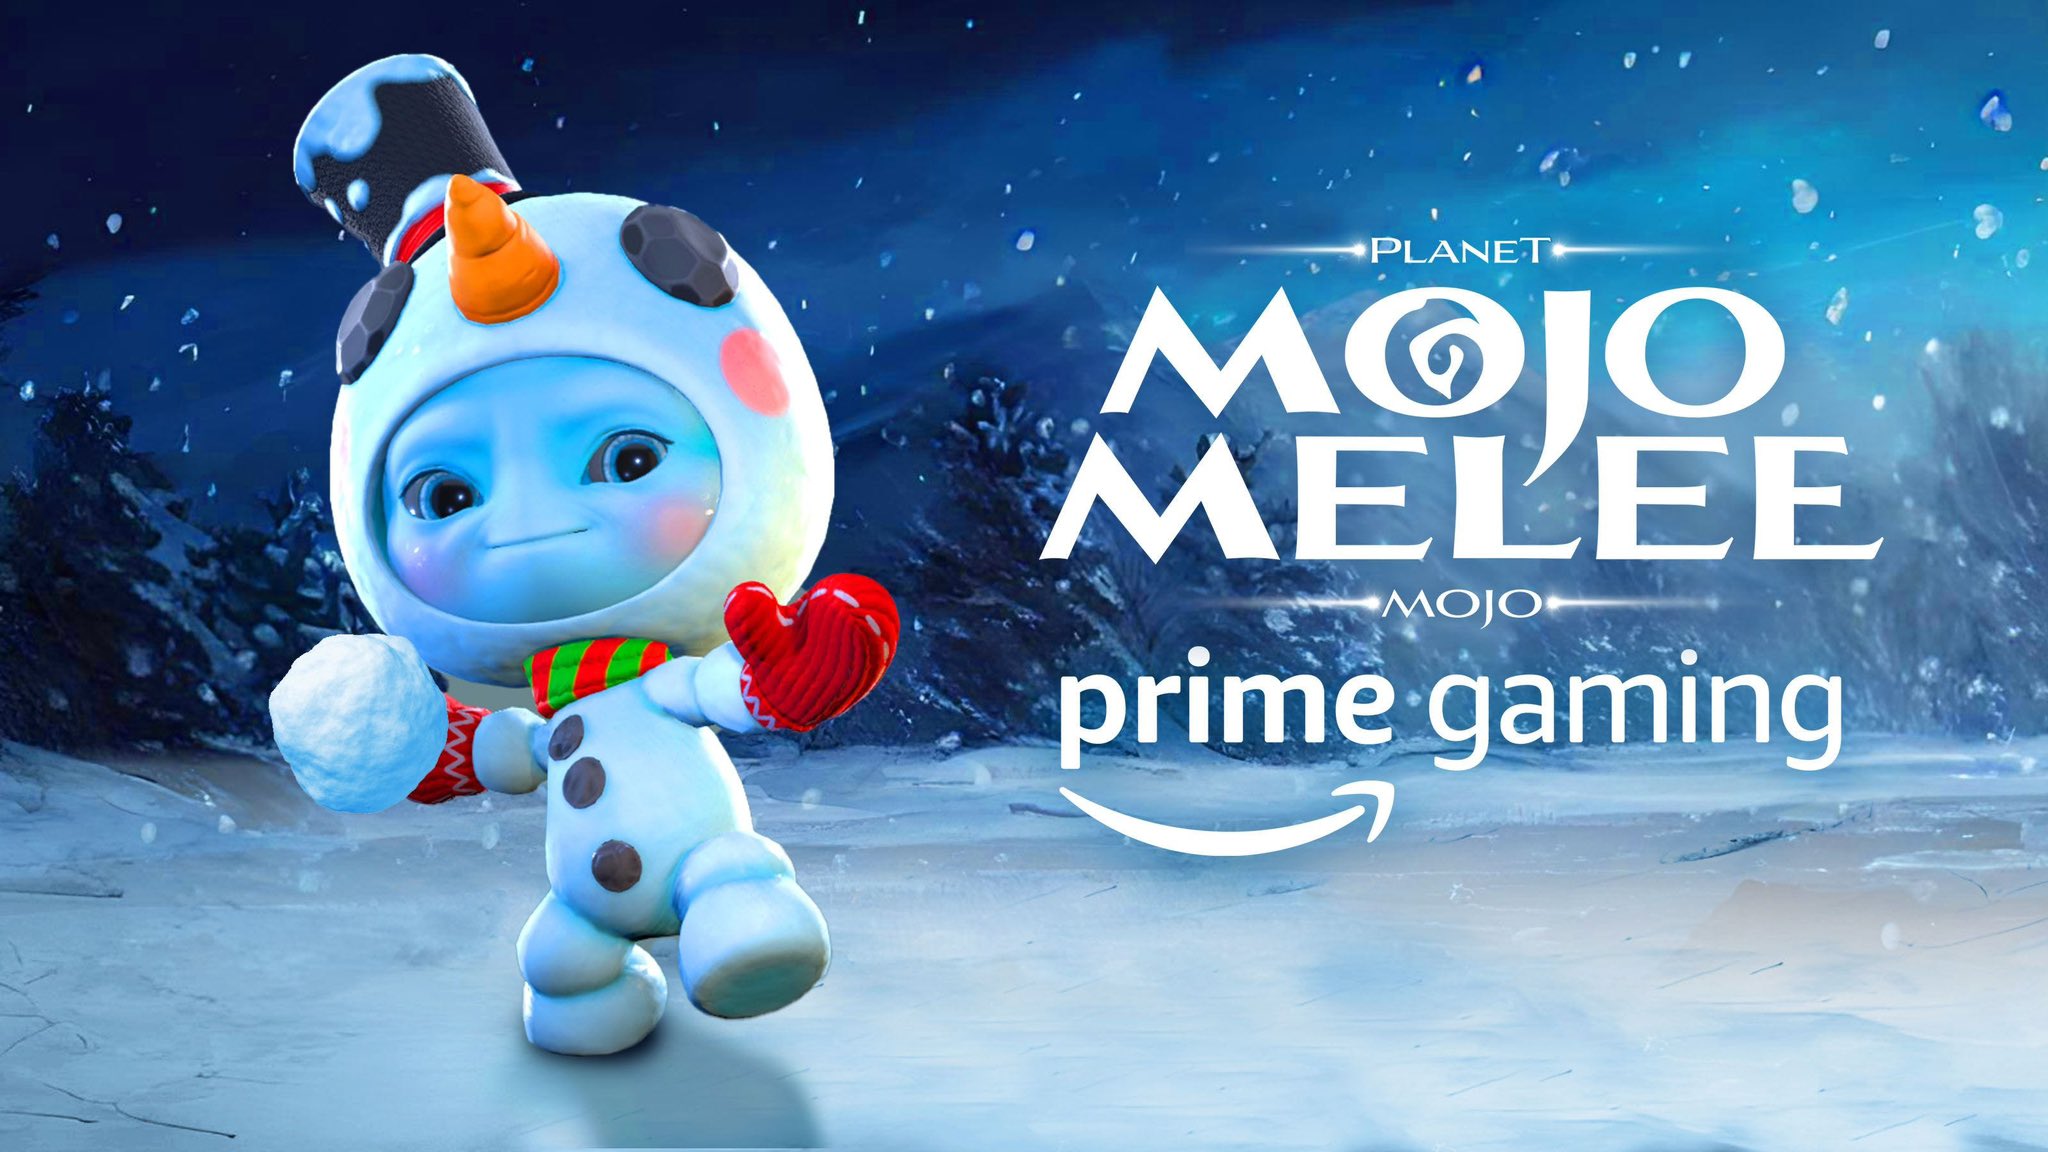 Mojo Melee Web3 game launches on  Prime Gaming